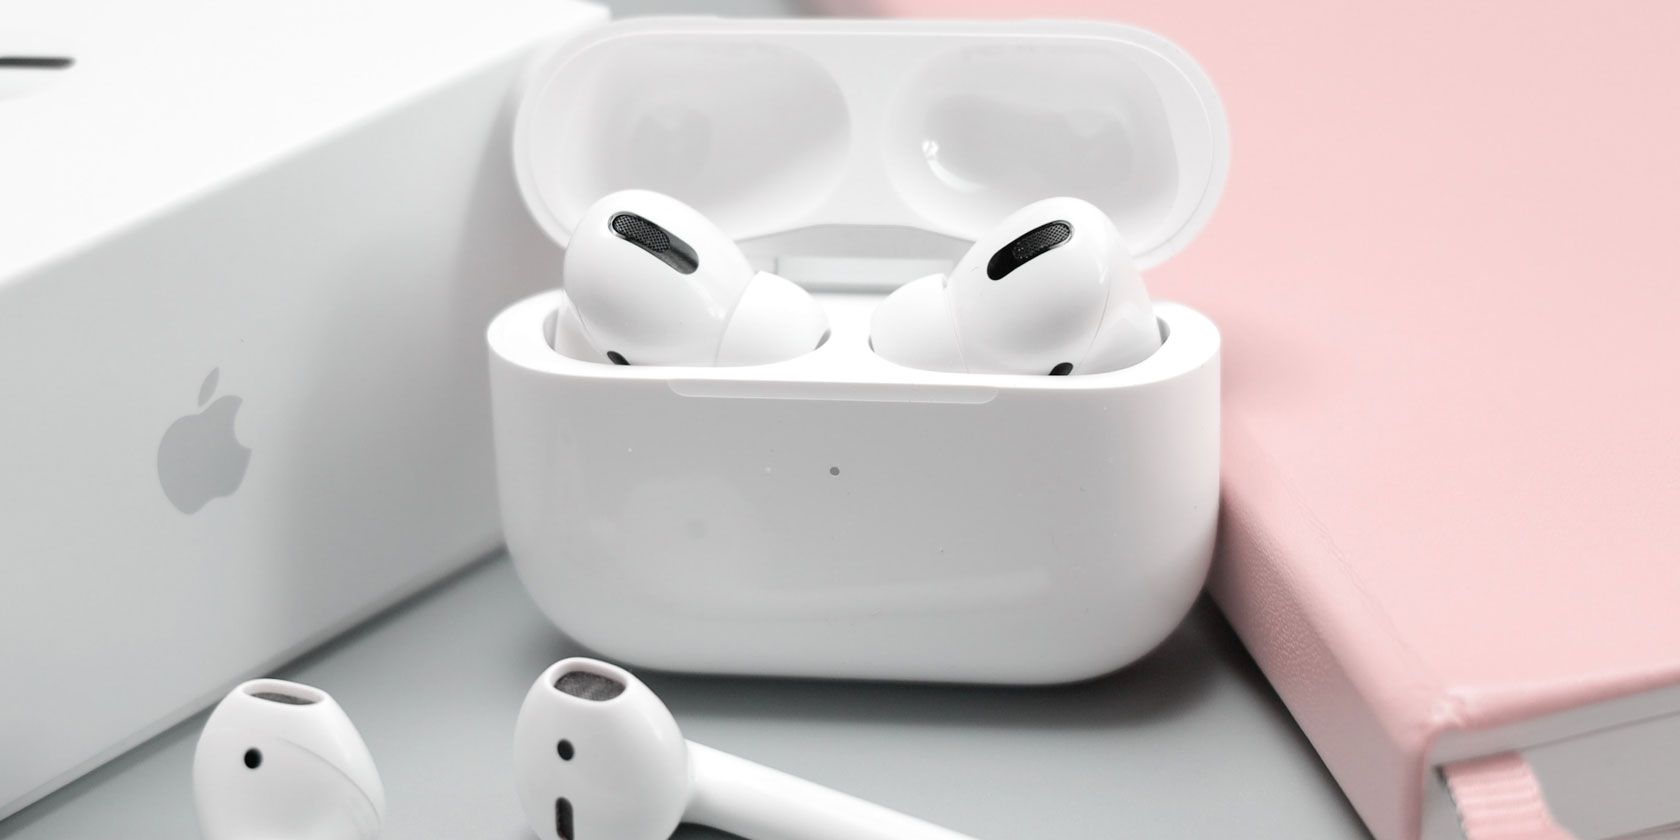 Apple AirPods and AirPods Pro